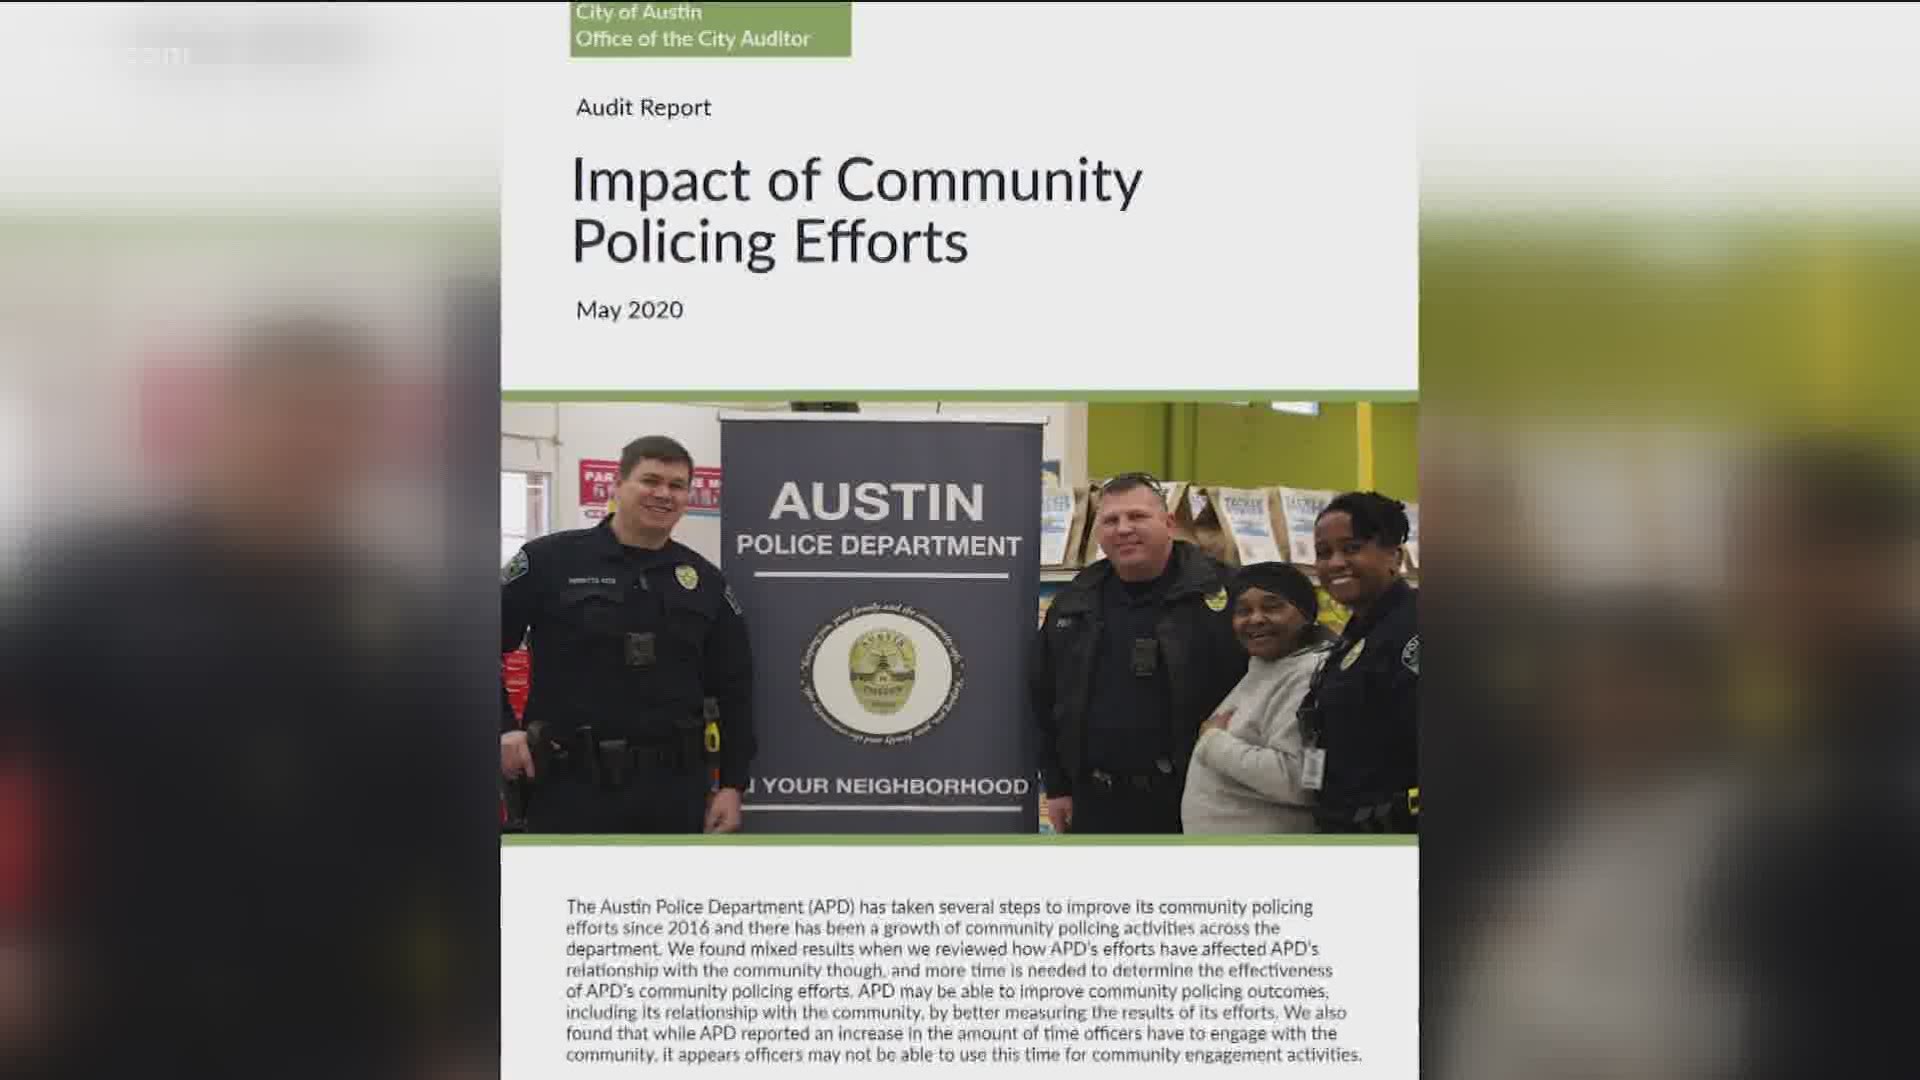 The audit, released in late May, found APD has taken steps to improve its community policing efforts, but more time is needed to determine the effectiveness.